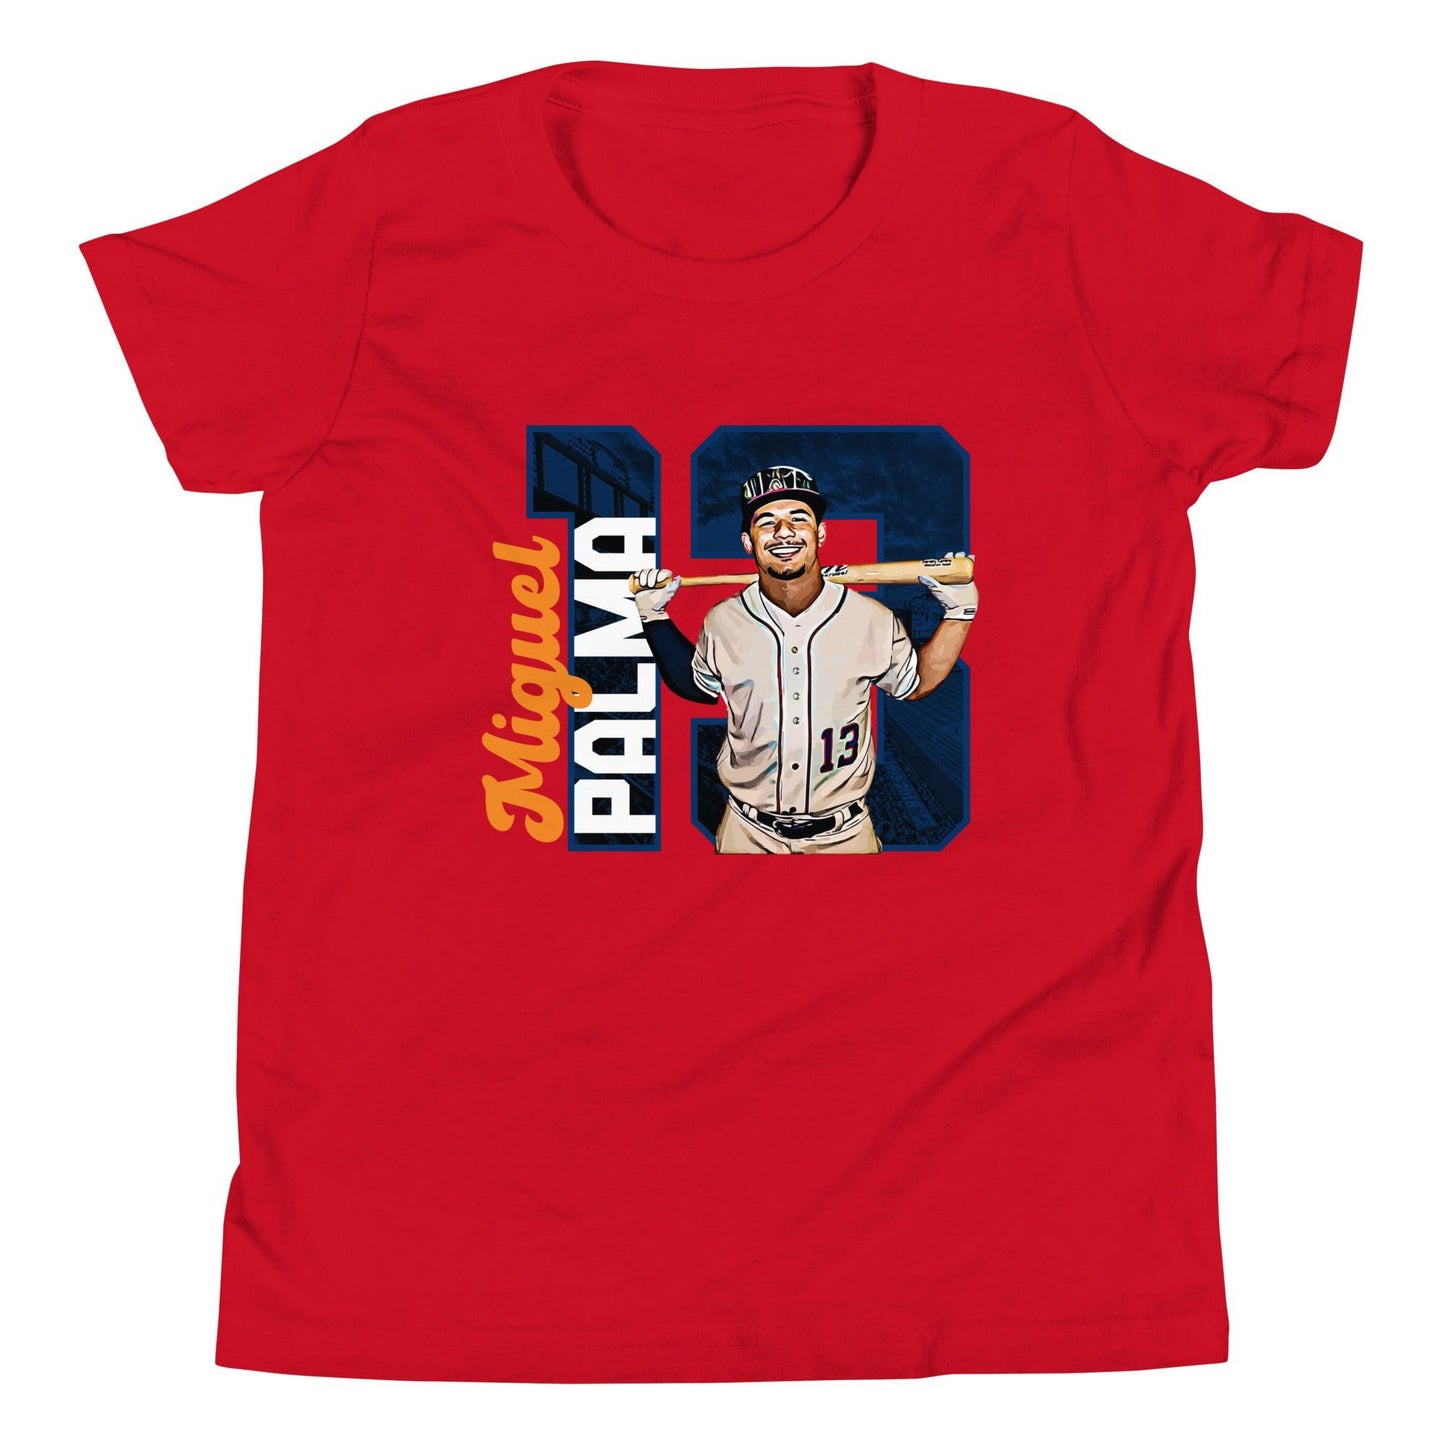 Miguel Palma "Gameday" Youth T-Shirt - Fan Arch